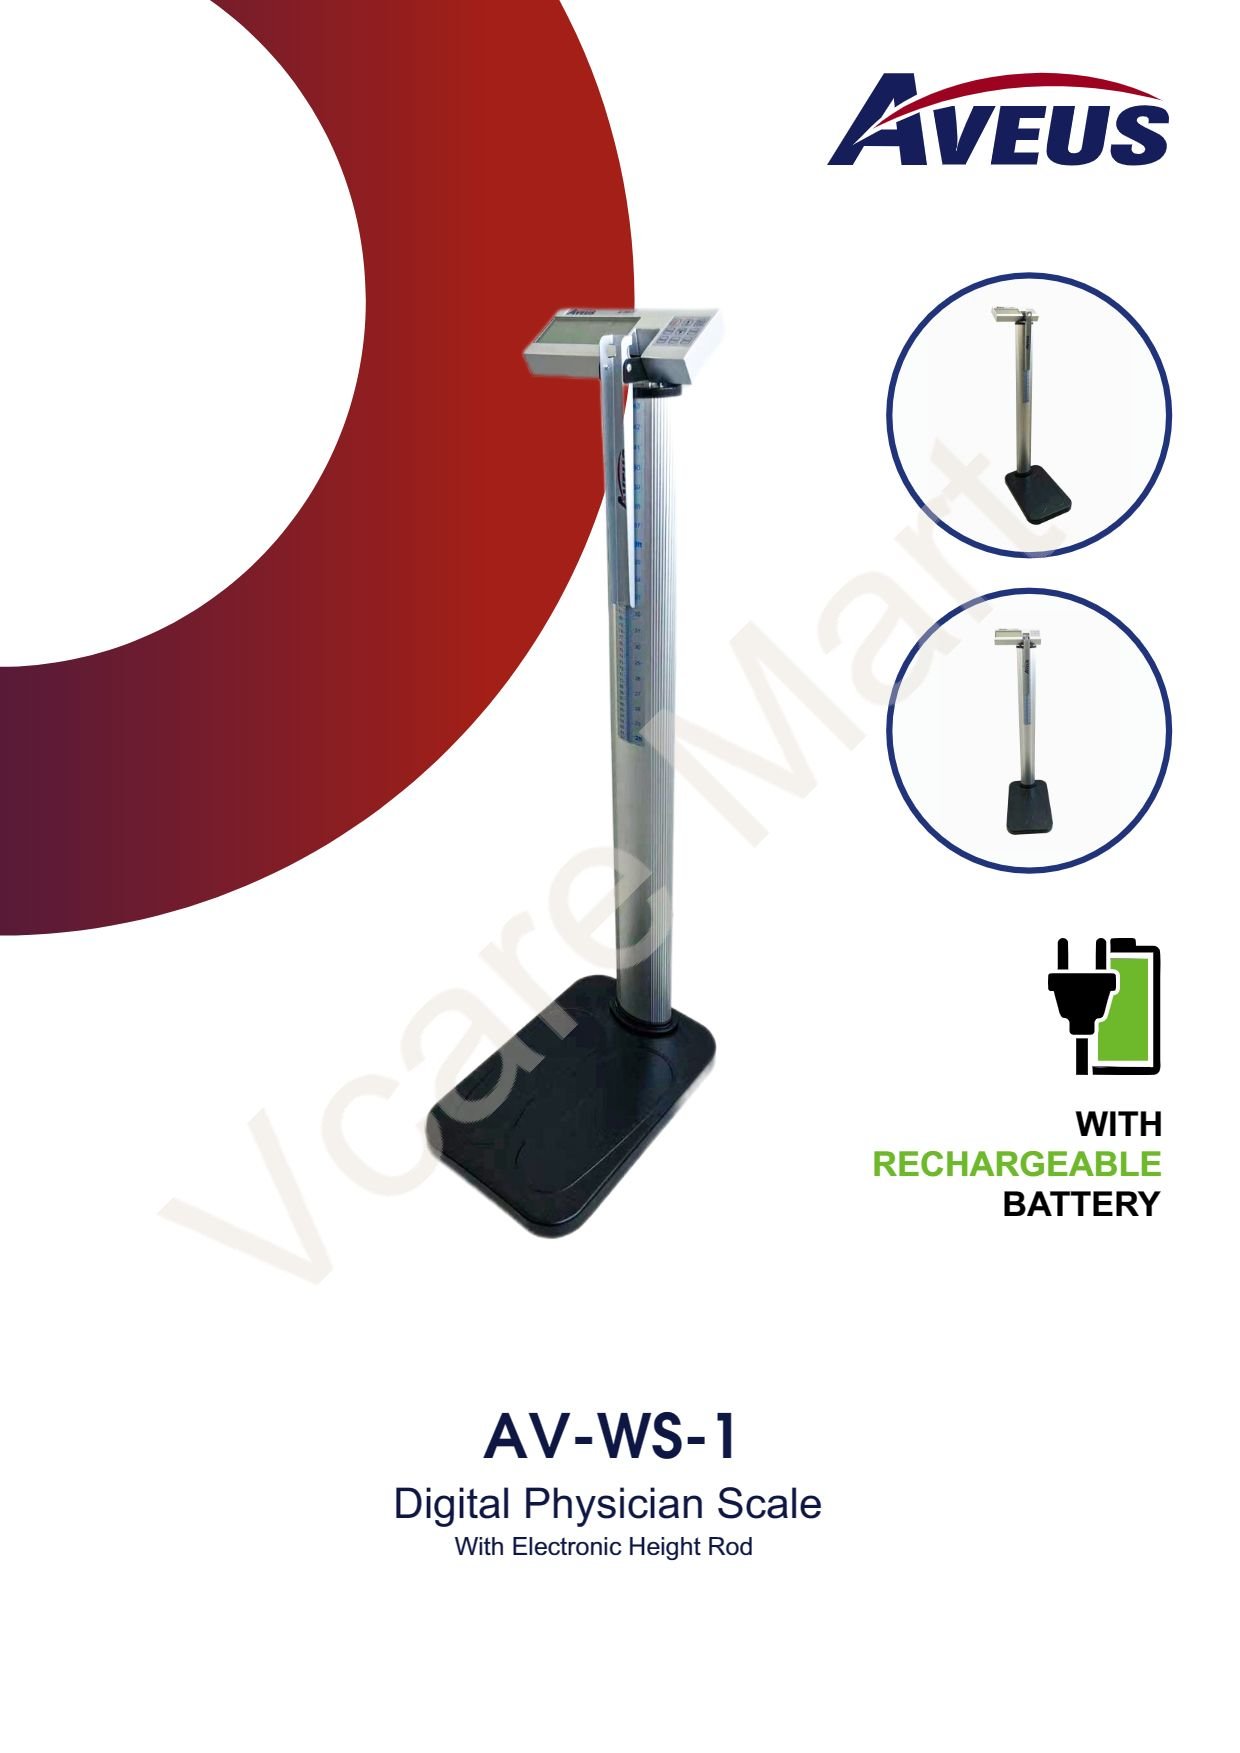 Catalogue of Aveus adult digital weighing scale AV-WS-1 for hospital, clinic gym and fitness center in UAE. Premium quality digital weighing scale at Vcare Mart in U.A.E